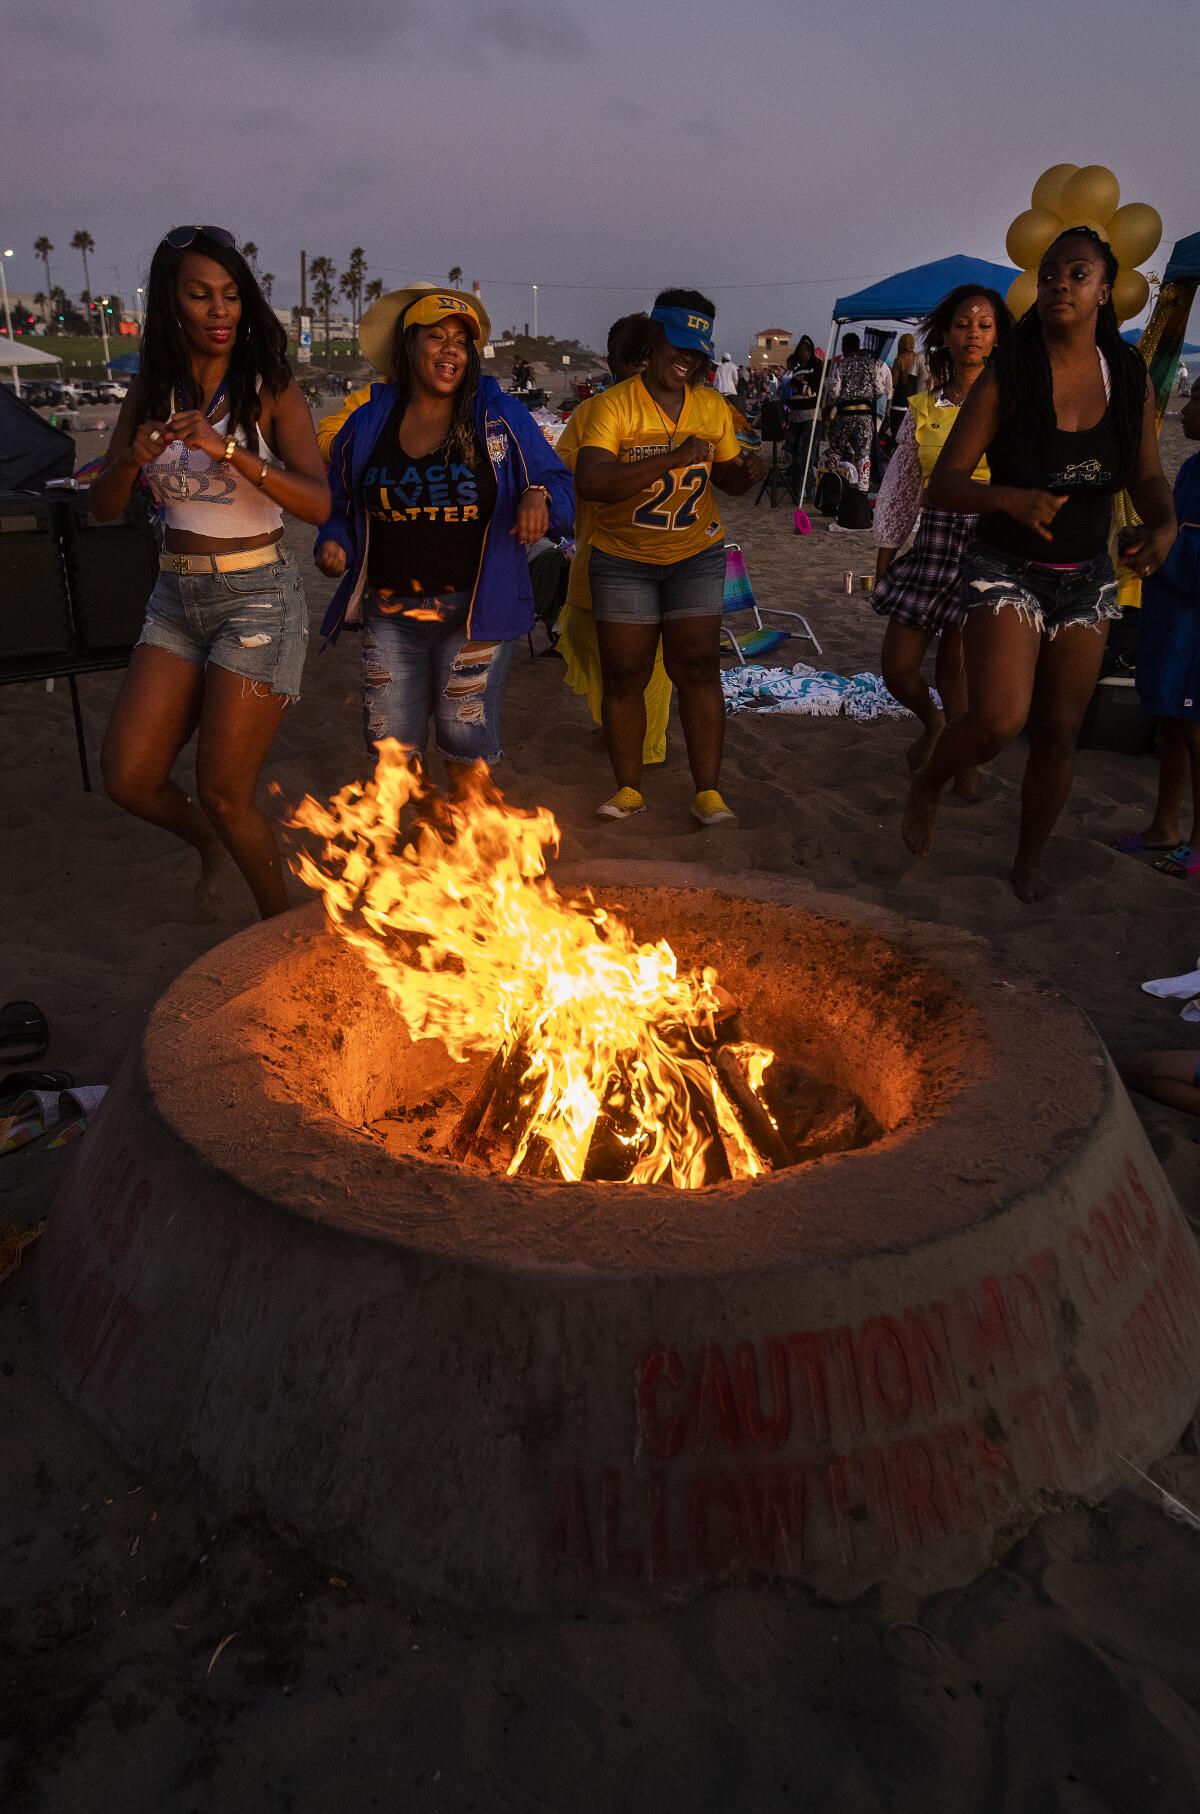 Members of the Sigma Gamma Rho sorority dance next to their bonfire at Dockweiler State Beach.